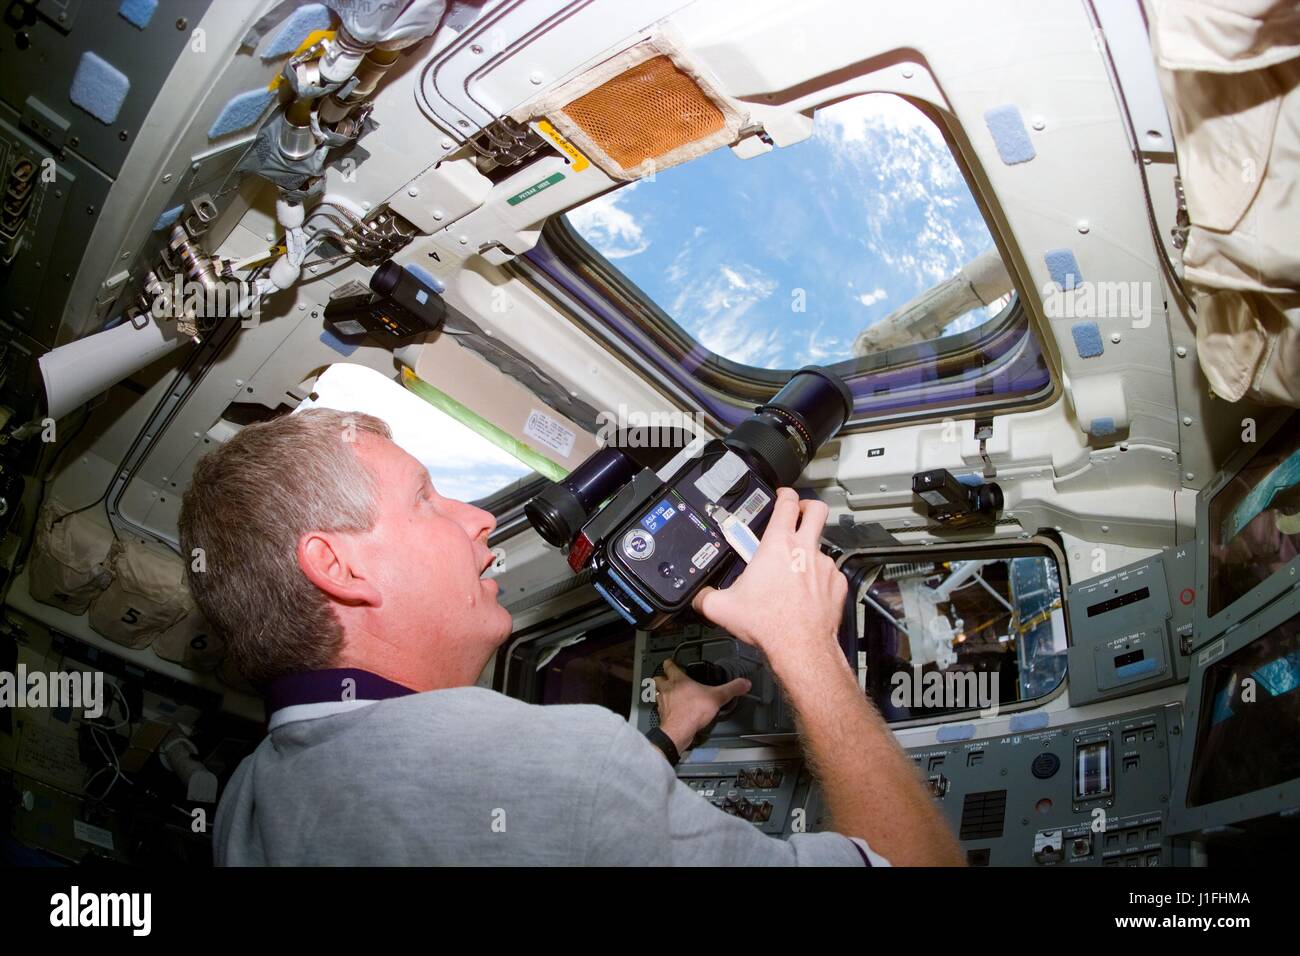 Photoelectric Maladroit Comrade NASA STS-82 prime crew astronaut Steve Hawley uses a 70mm Hasselblad camera  to photograph the Hubble Space Telescope from the overhead flight deck  windows aboard the Space Shuttle Discovery February 14, 1997